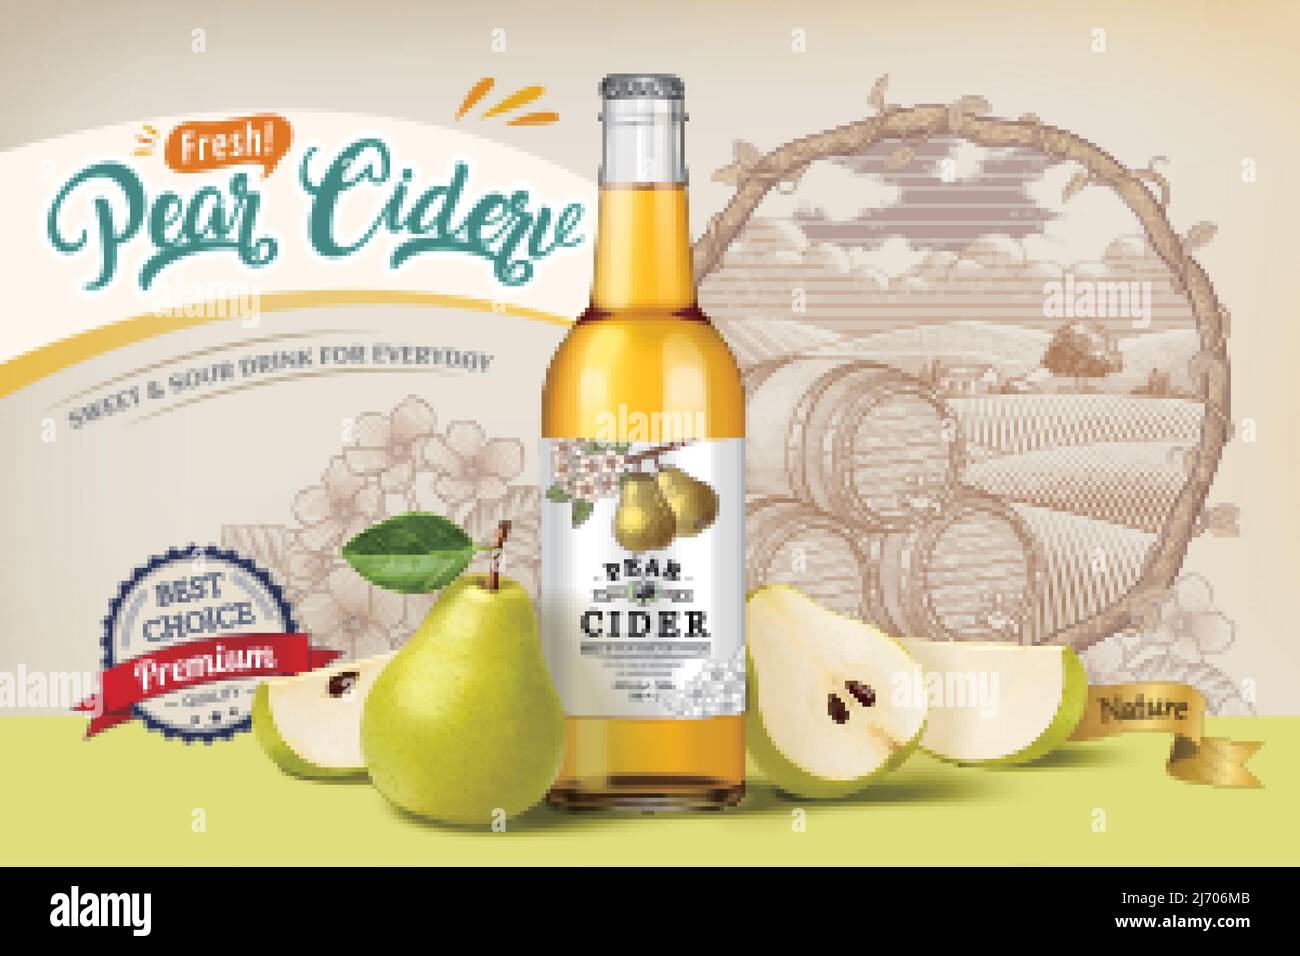 Pear cider banner ad. 3D Illustration of pear cider bottle with pear fruit and its wedges on retro engraving field background Stock Vector